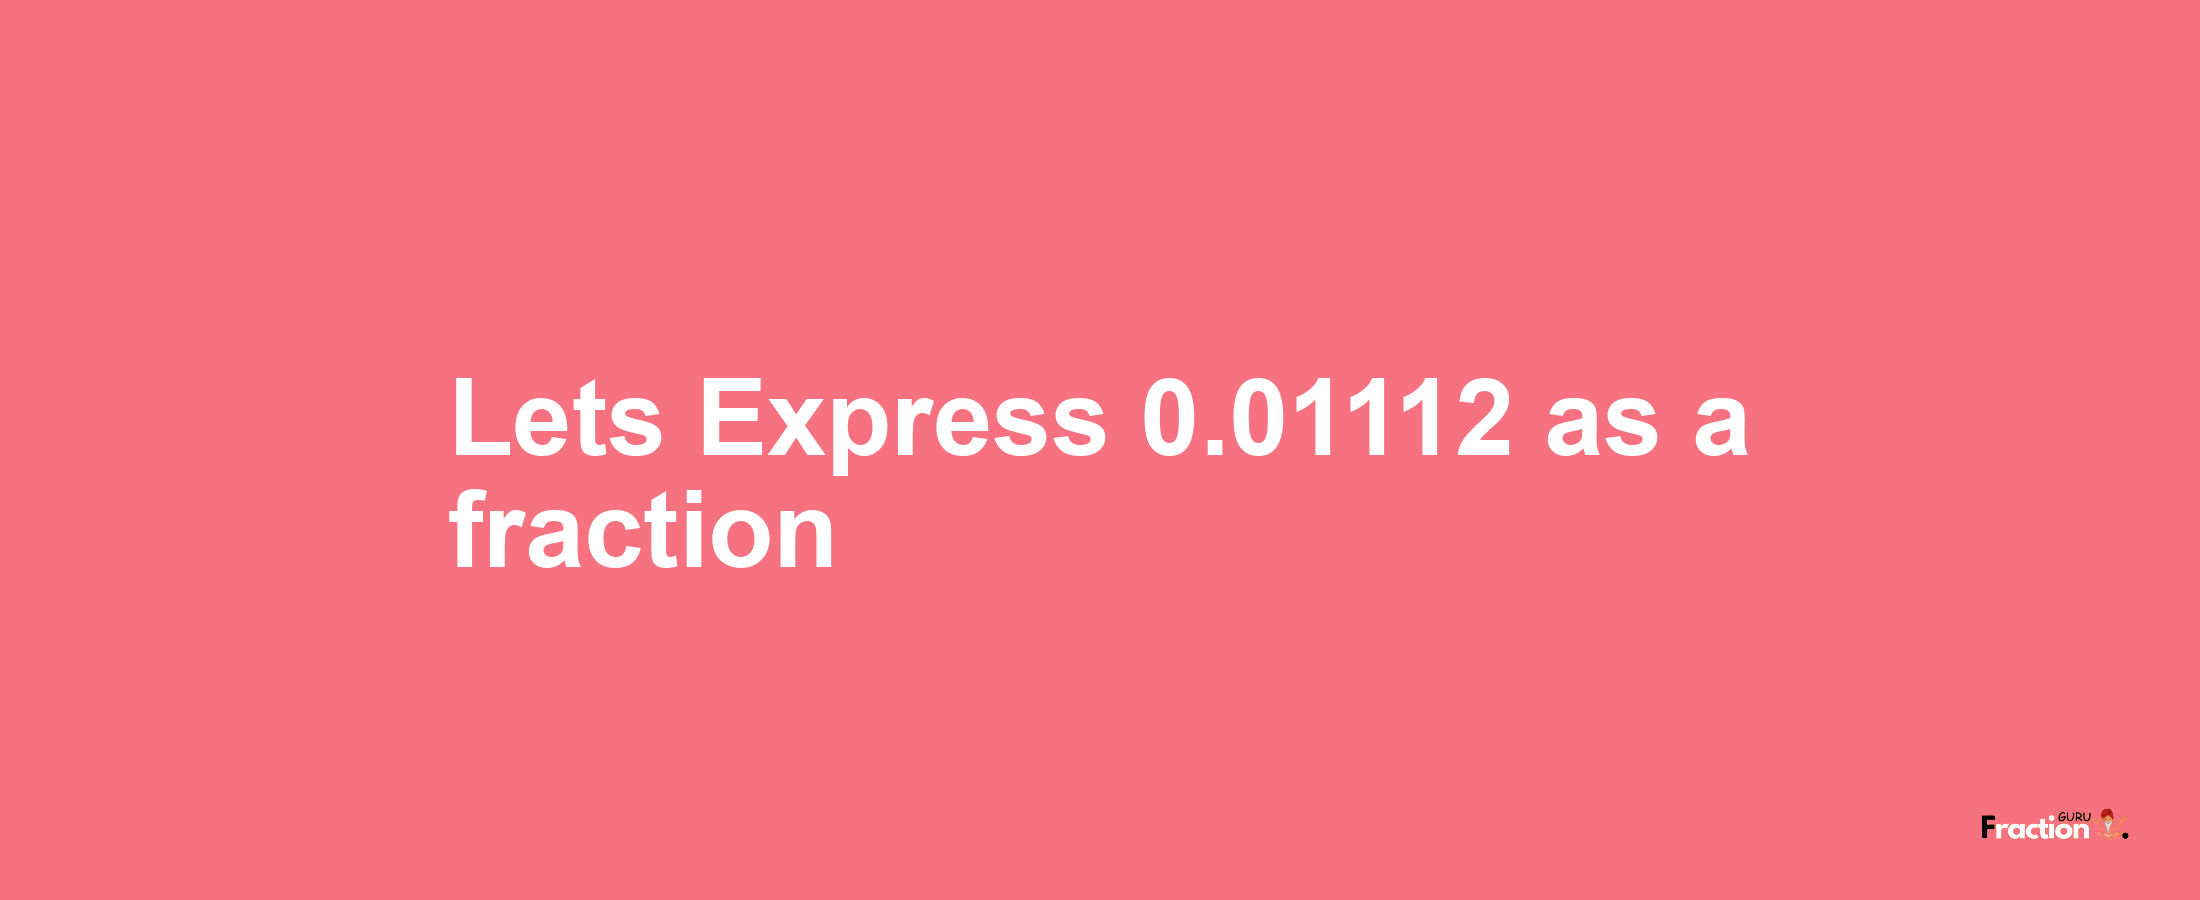 Lets Express 0.01112 as afraction